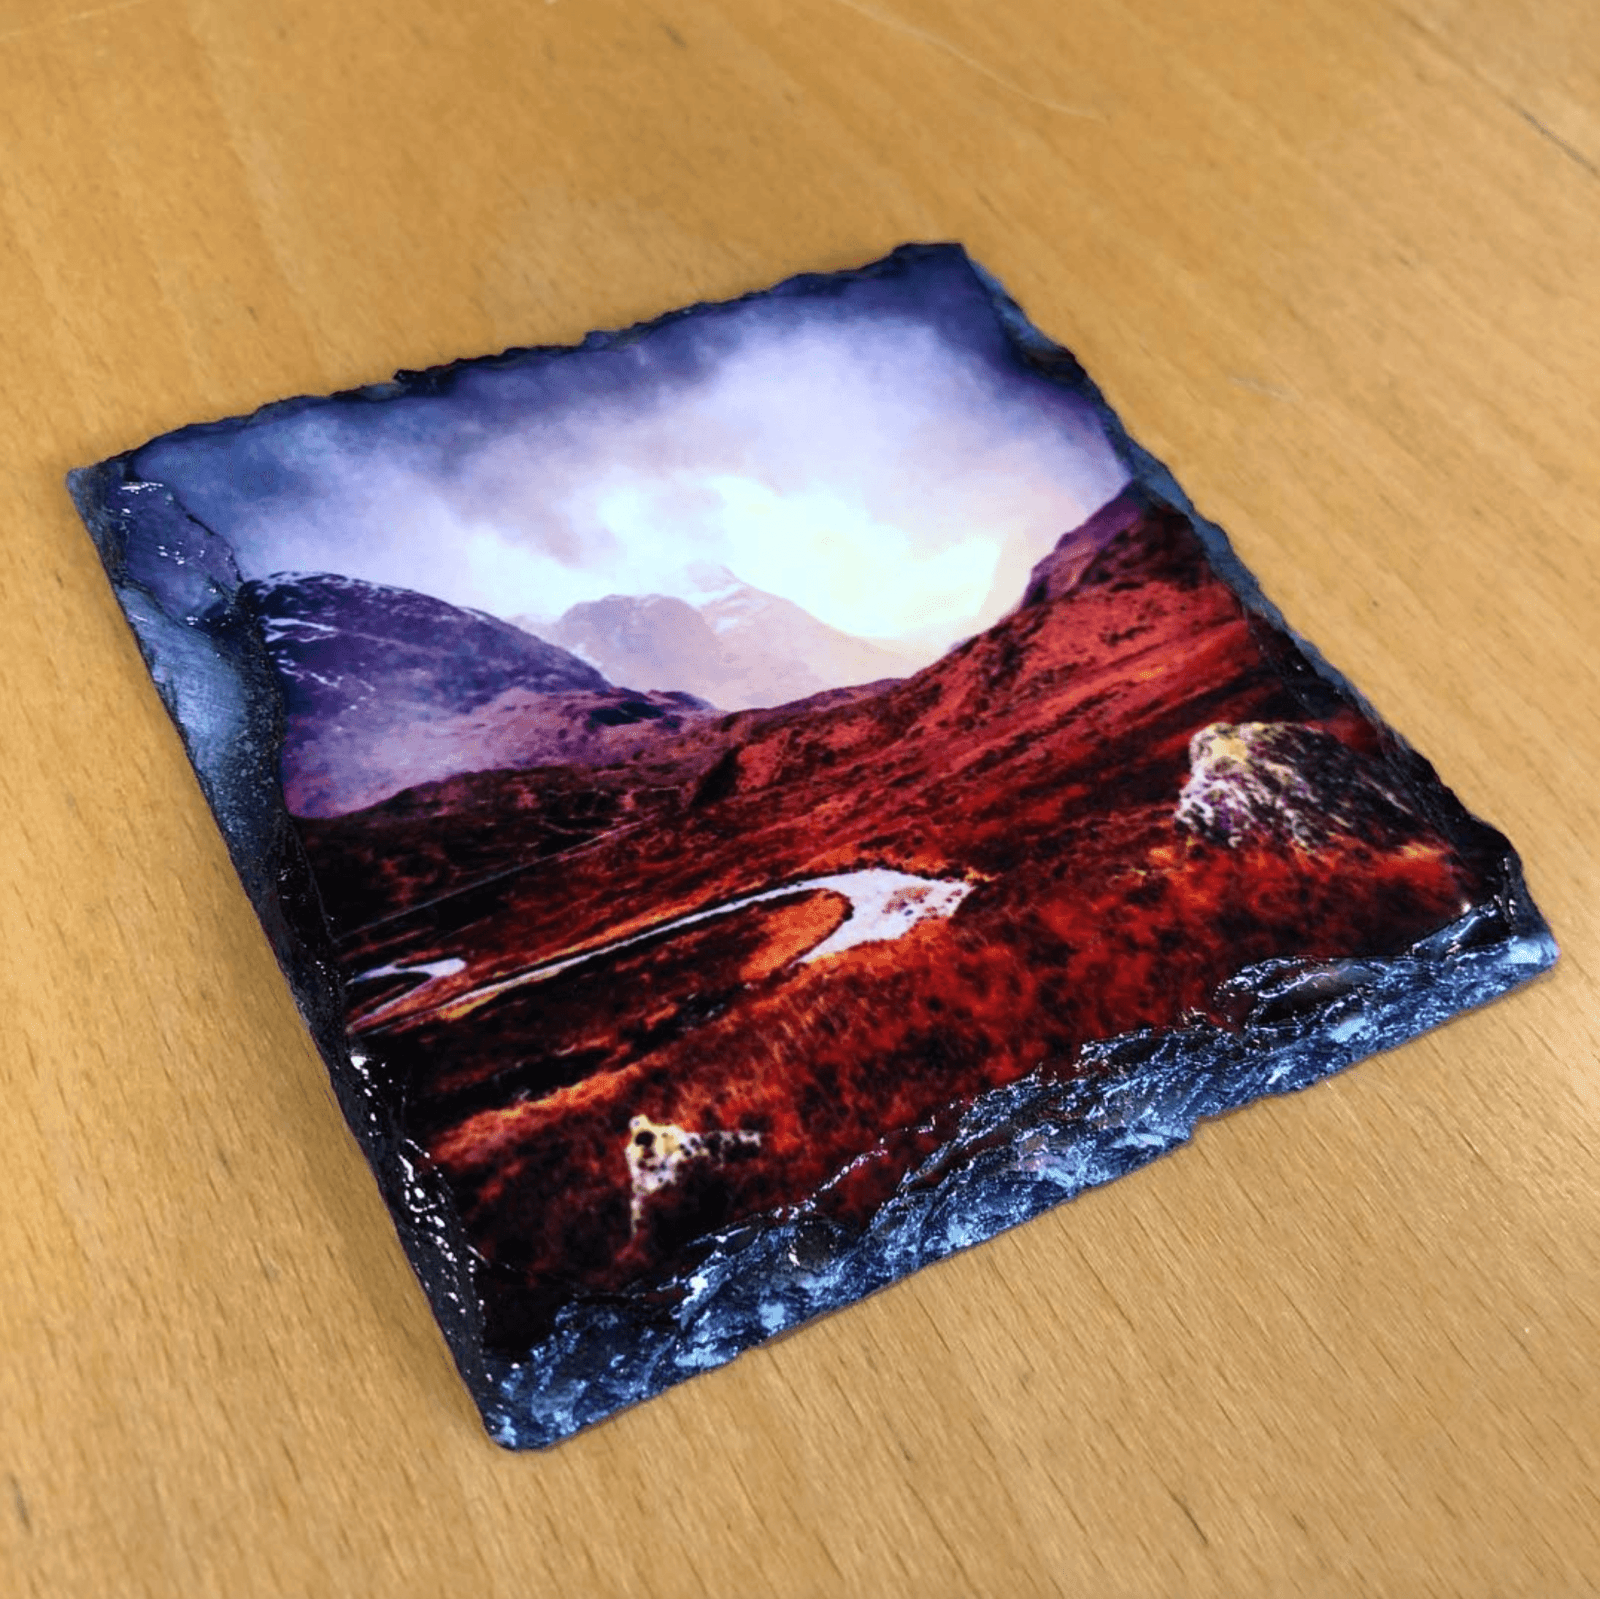 Father Daughter Snow Scottish Slate Art-Slate Art-Abstract & Impressionistic Art Gallery-Paintings, Prints, Homeware, Art Gifts From Scotland By Scottish Artist Kevin Hunter